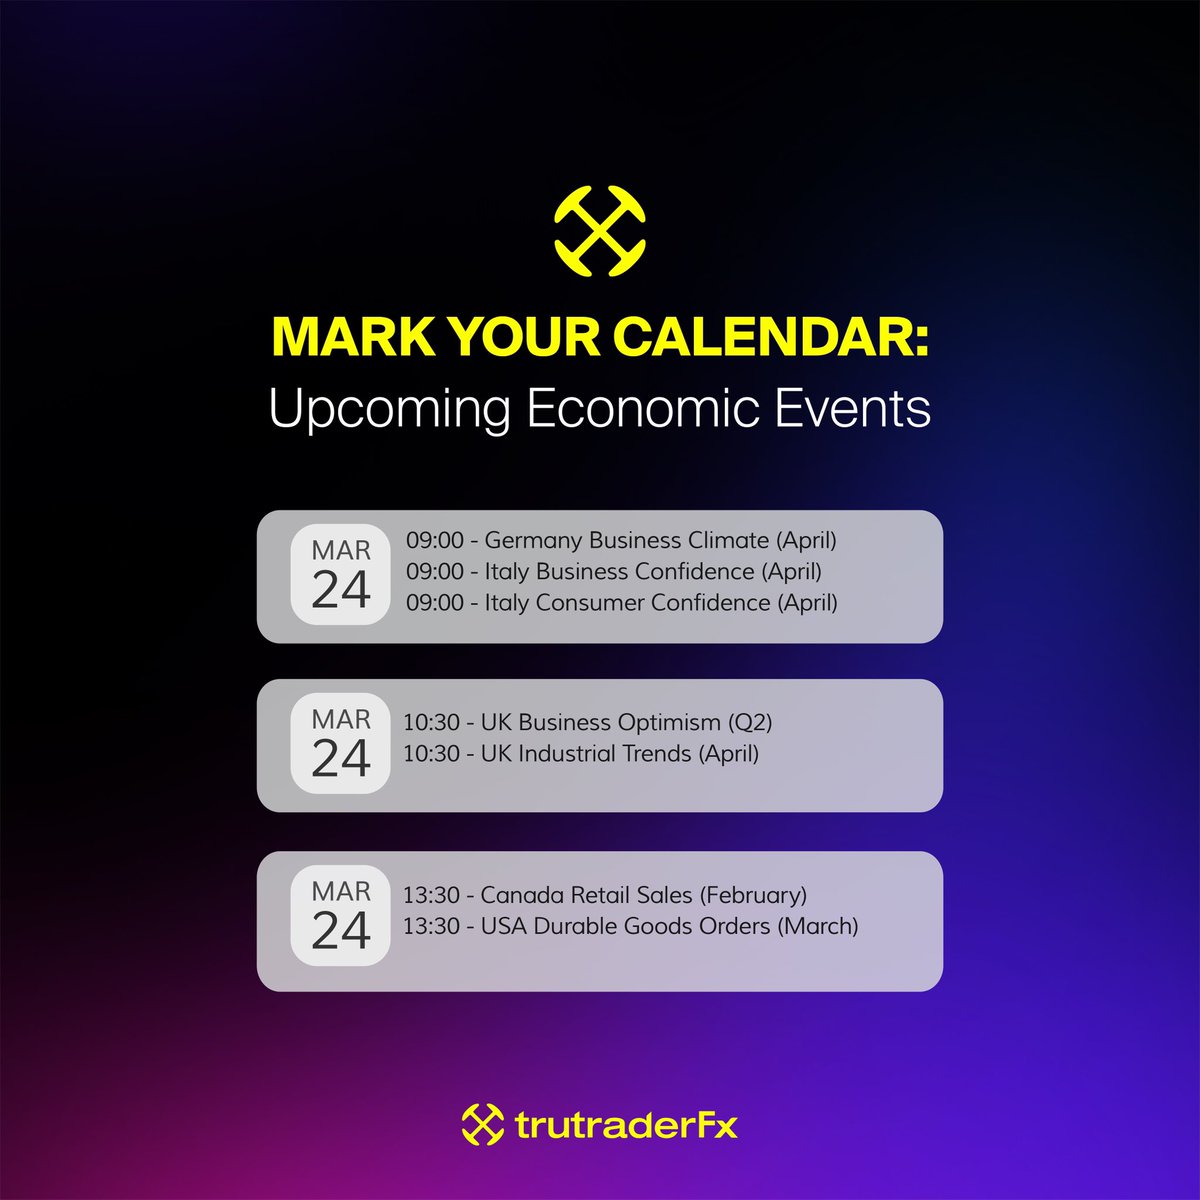 🗓️ Get ready for some market excitement today! Important economic data is on the horizon for Eurozone 🇩🇪 🇮🇹 countries, 🇨🇦 Canada, and the 🇺🇸 USA. Buckle up for possible high volatility in the market. #trutraderfx #forex